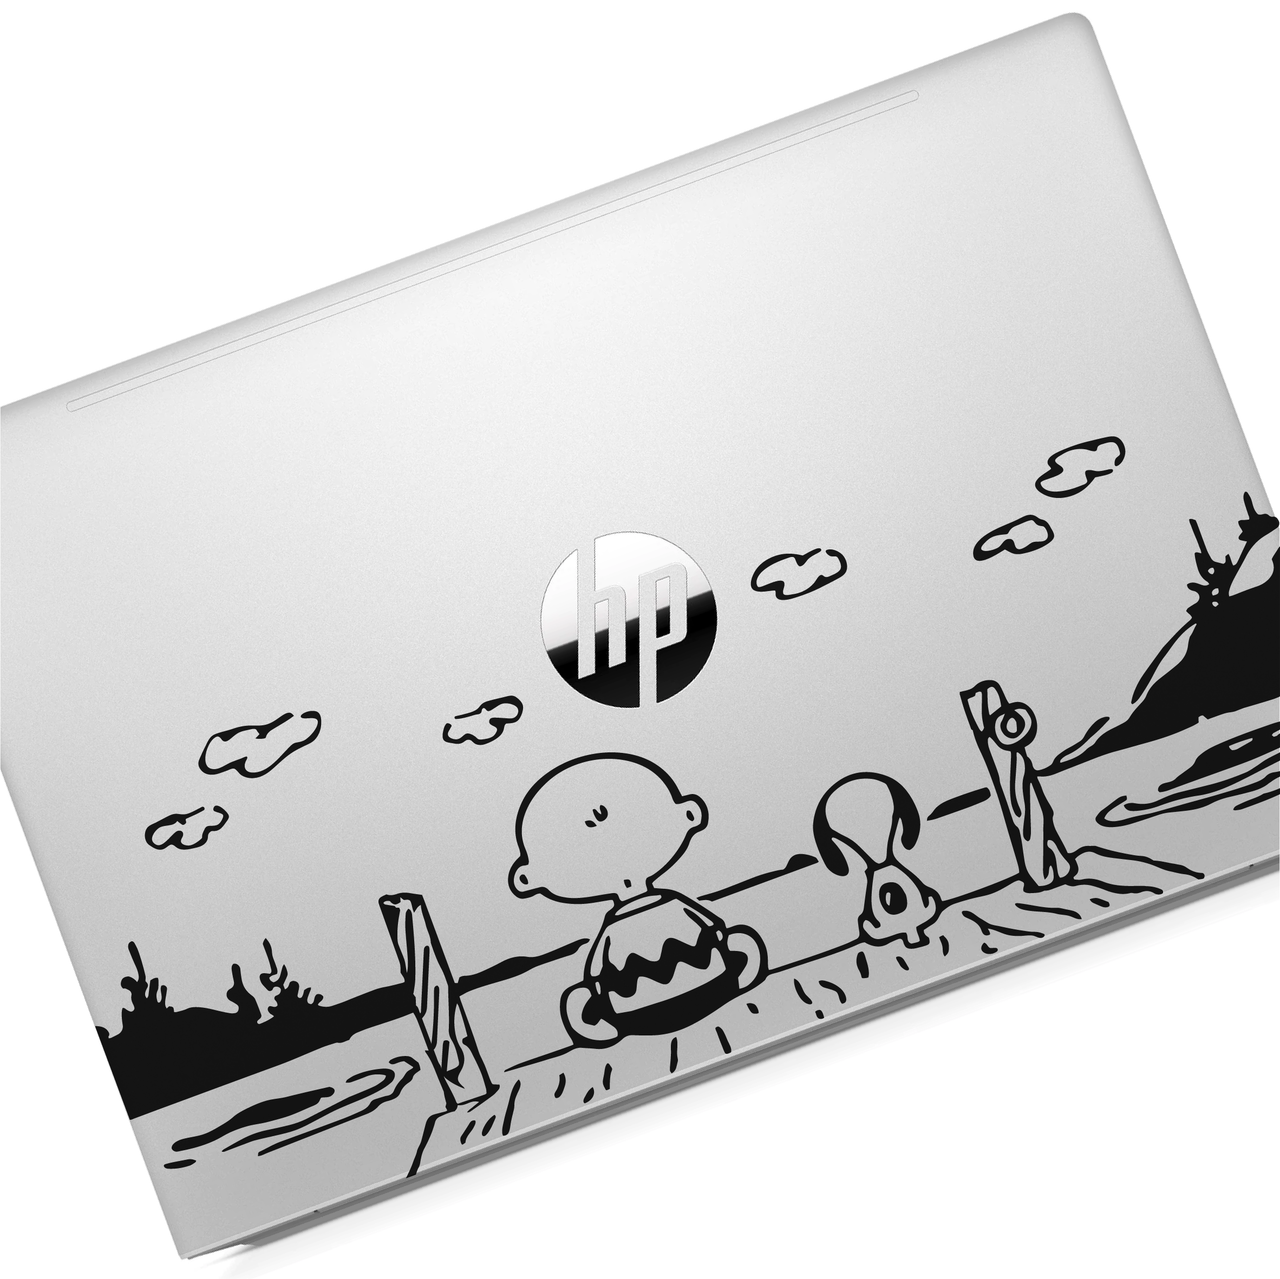 Snoopy and Charlie Brown Sunset Laptop Decal